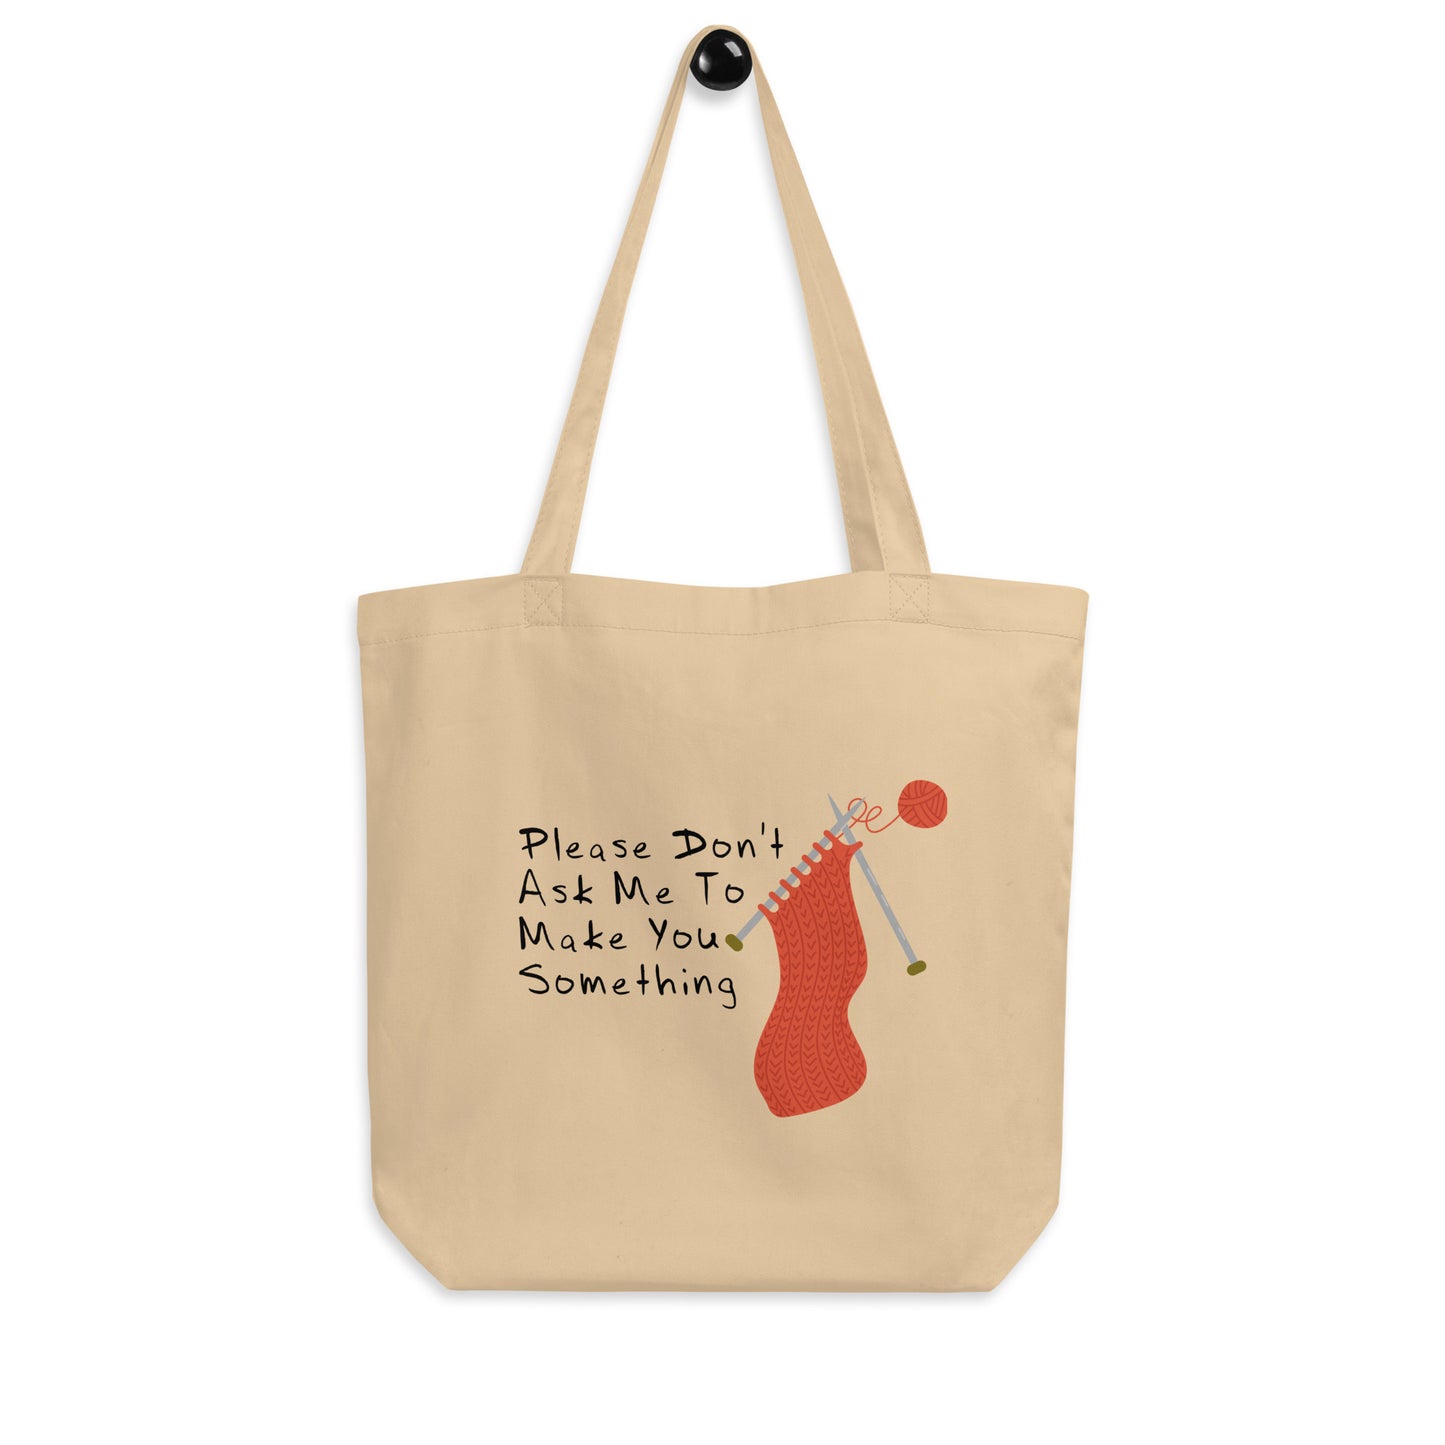 Please Don't Ask Me To Make You Something - Tote Bag